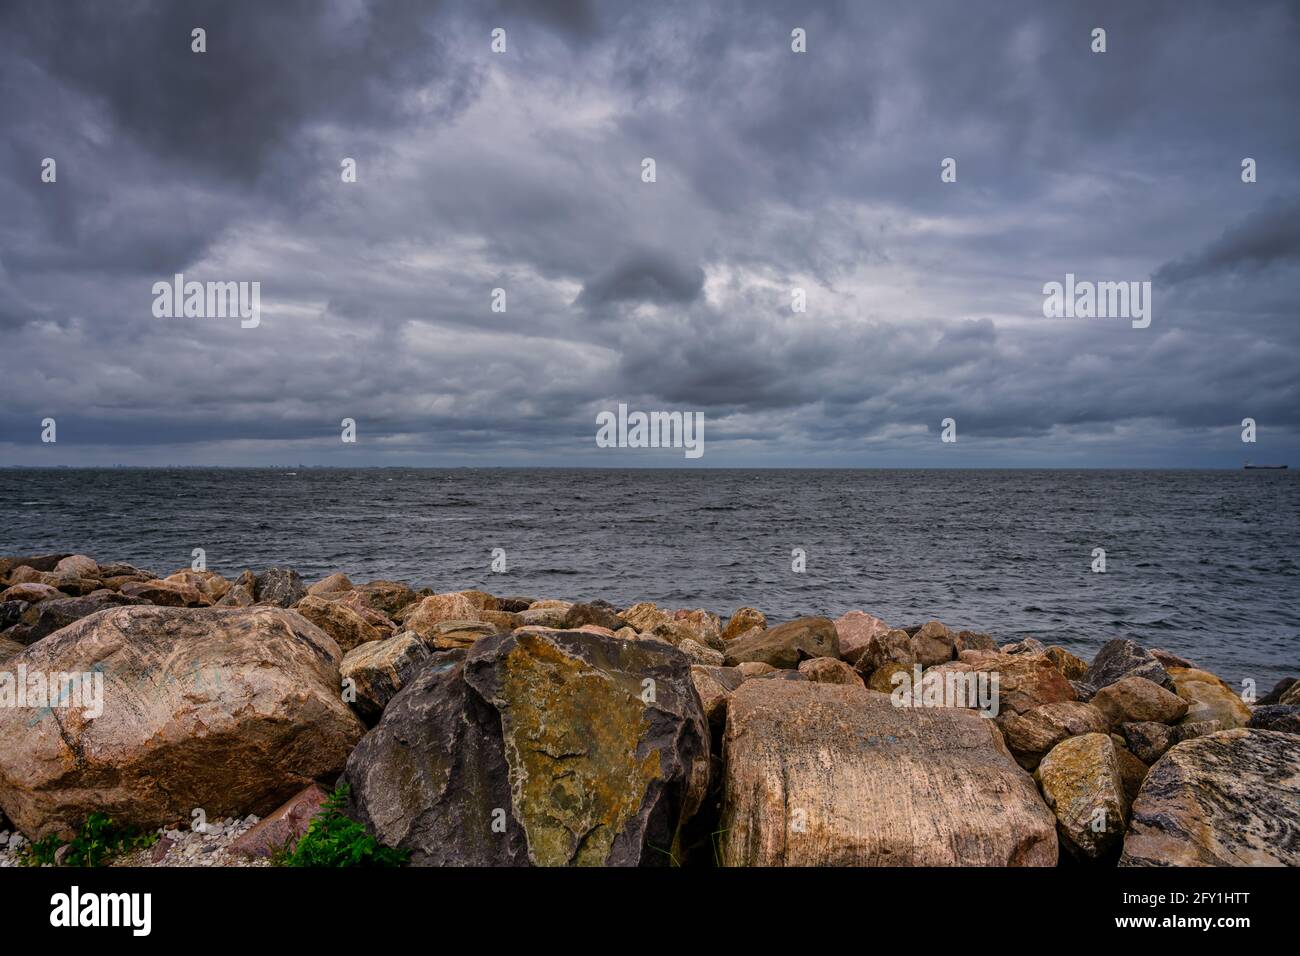 A beautiful, dramatic sky over the ocean. Stones in a wave breaker in the foreground. Picture from Malmo, Sweden Stock Photo